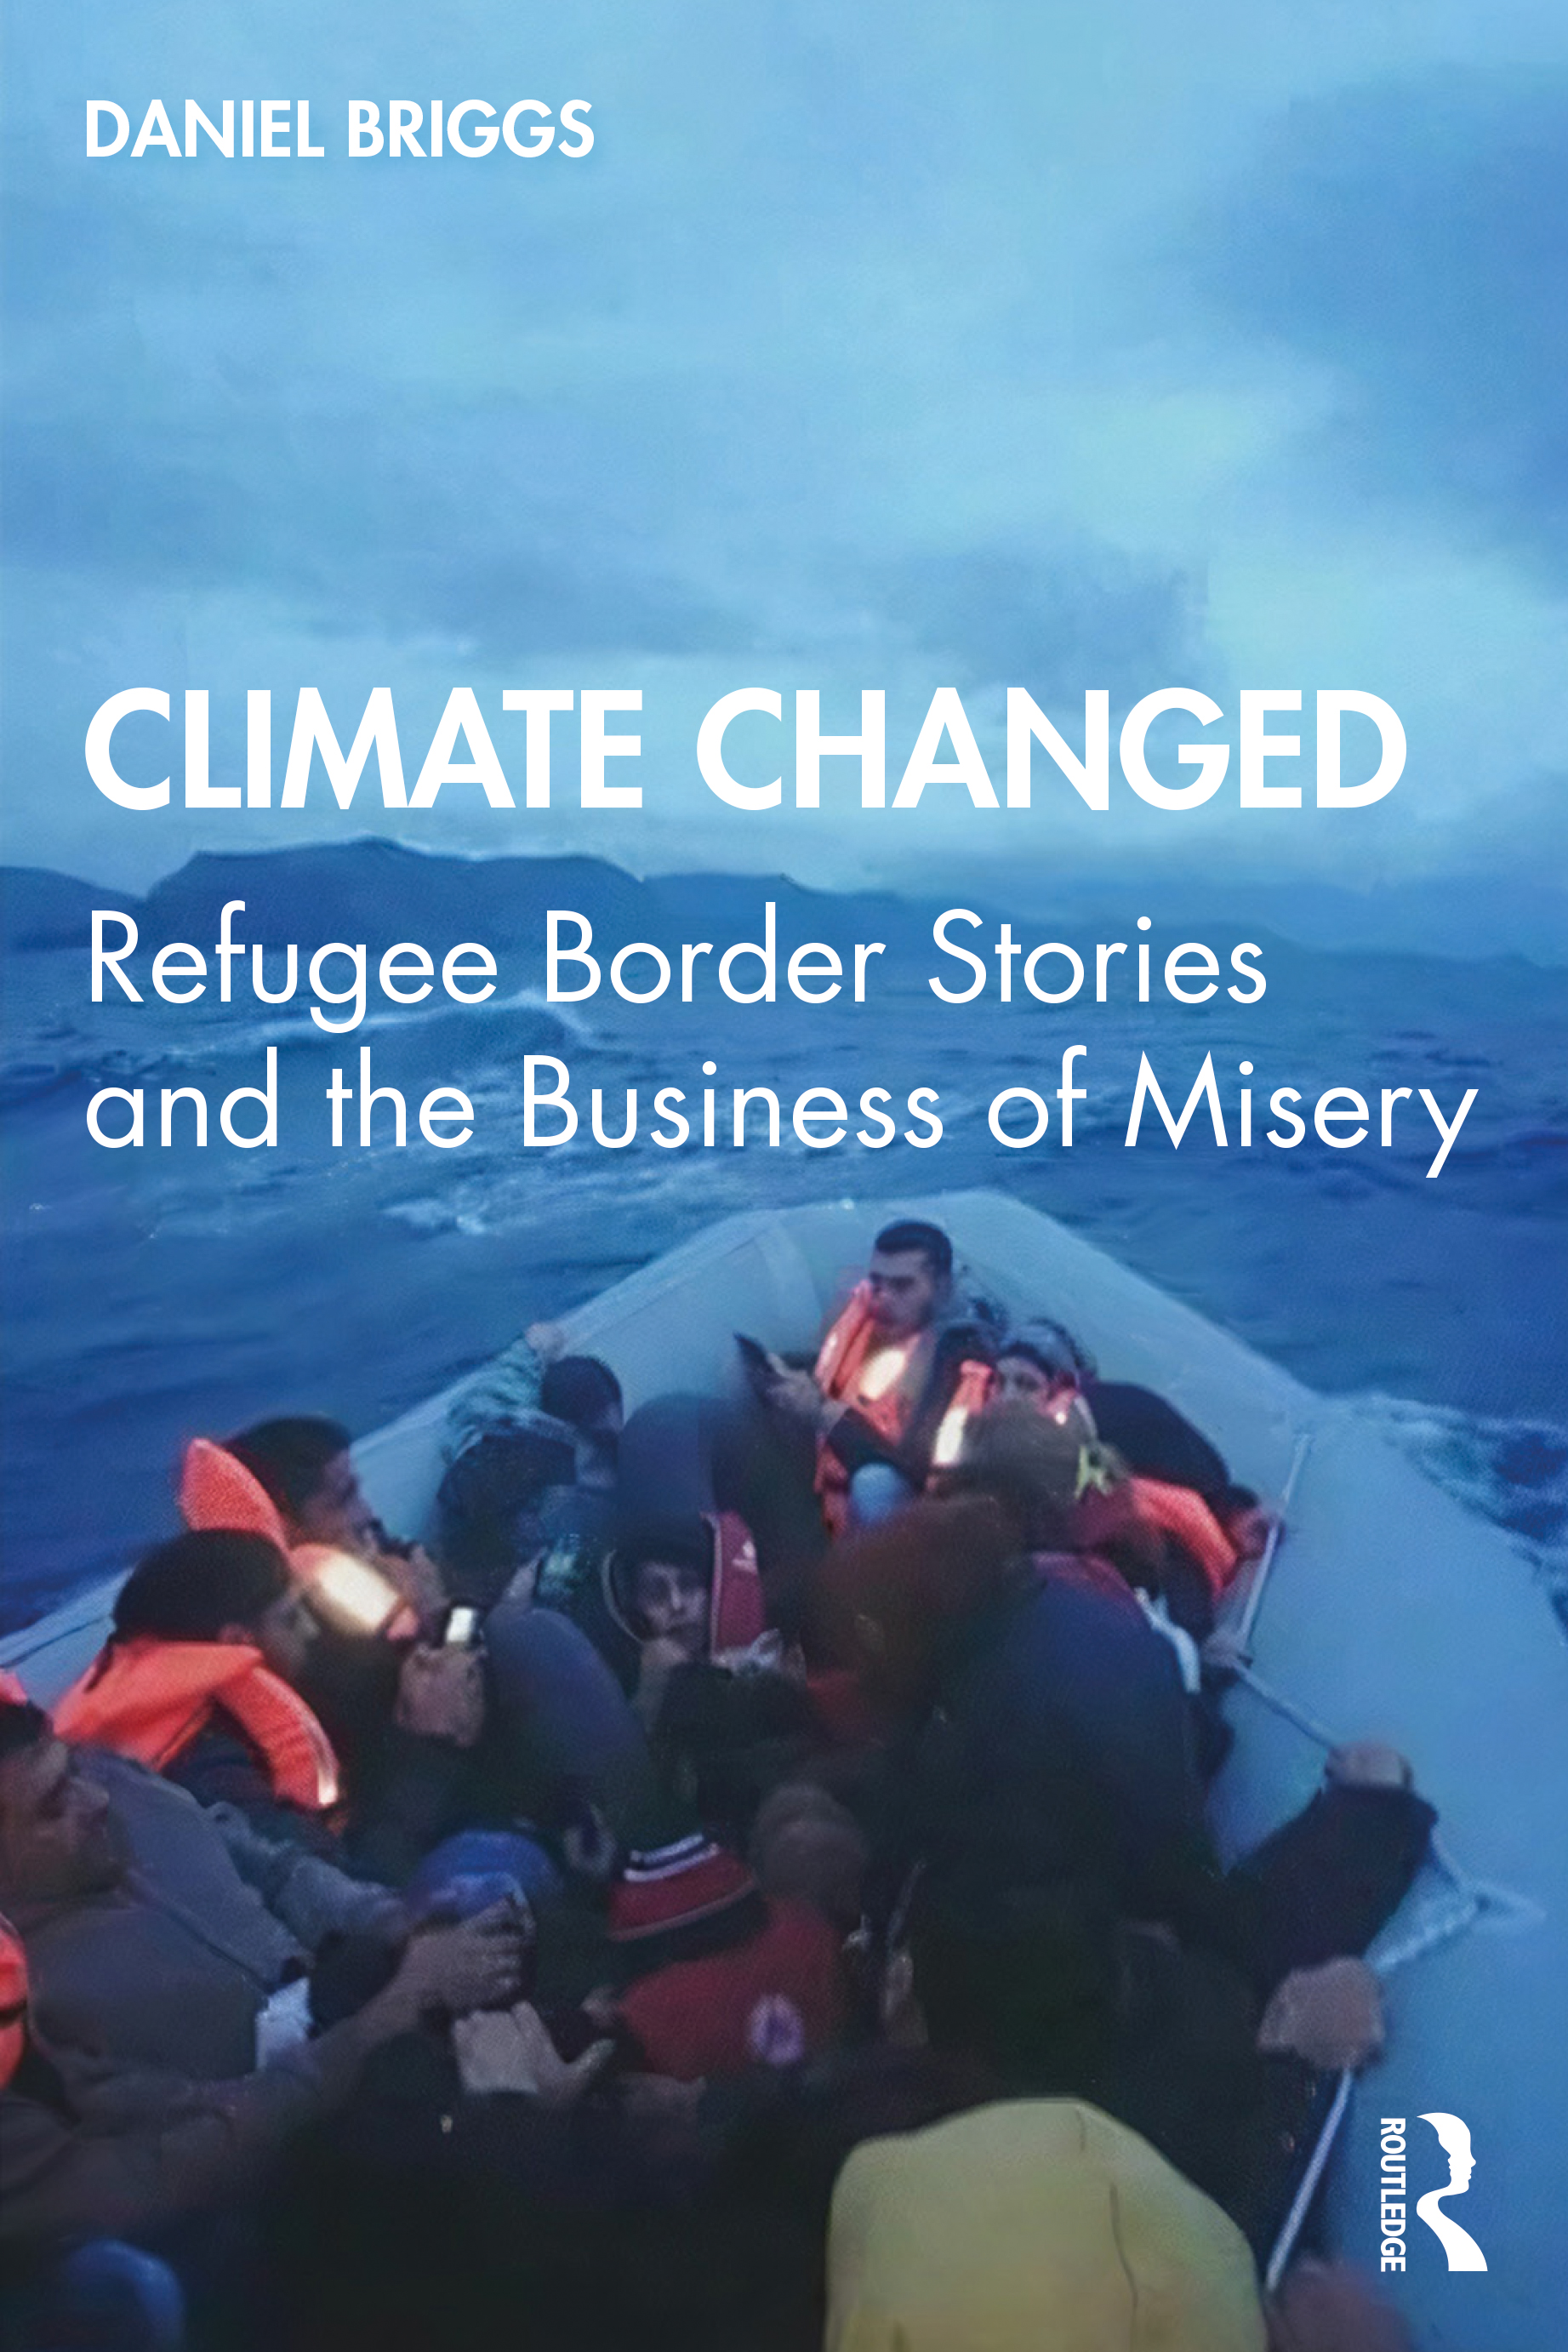 book cover Climate Changed depicting migrants in a lifeboat on the ocean